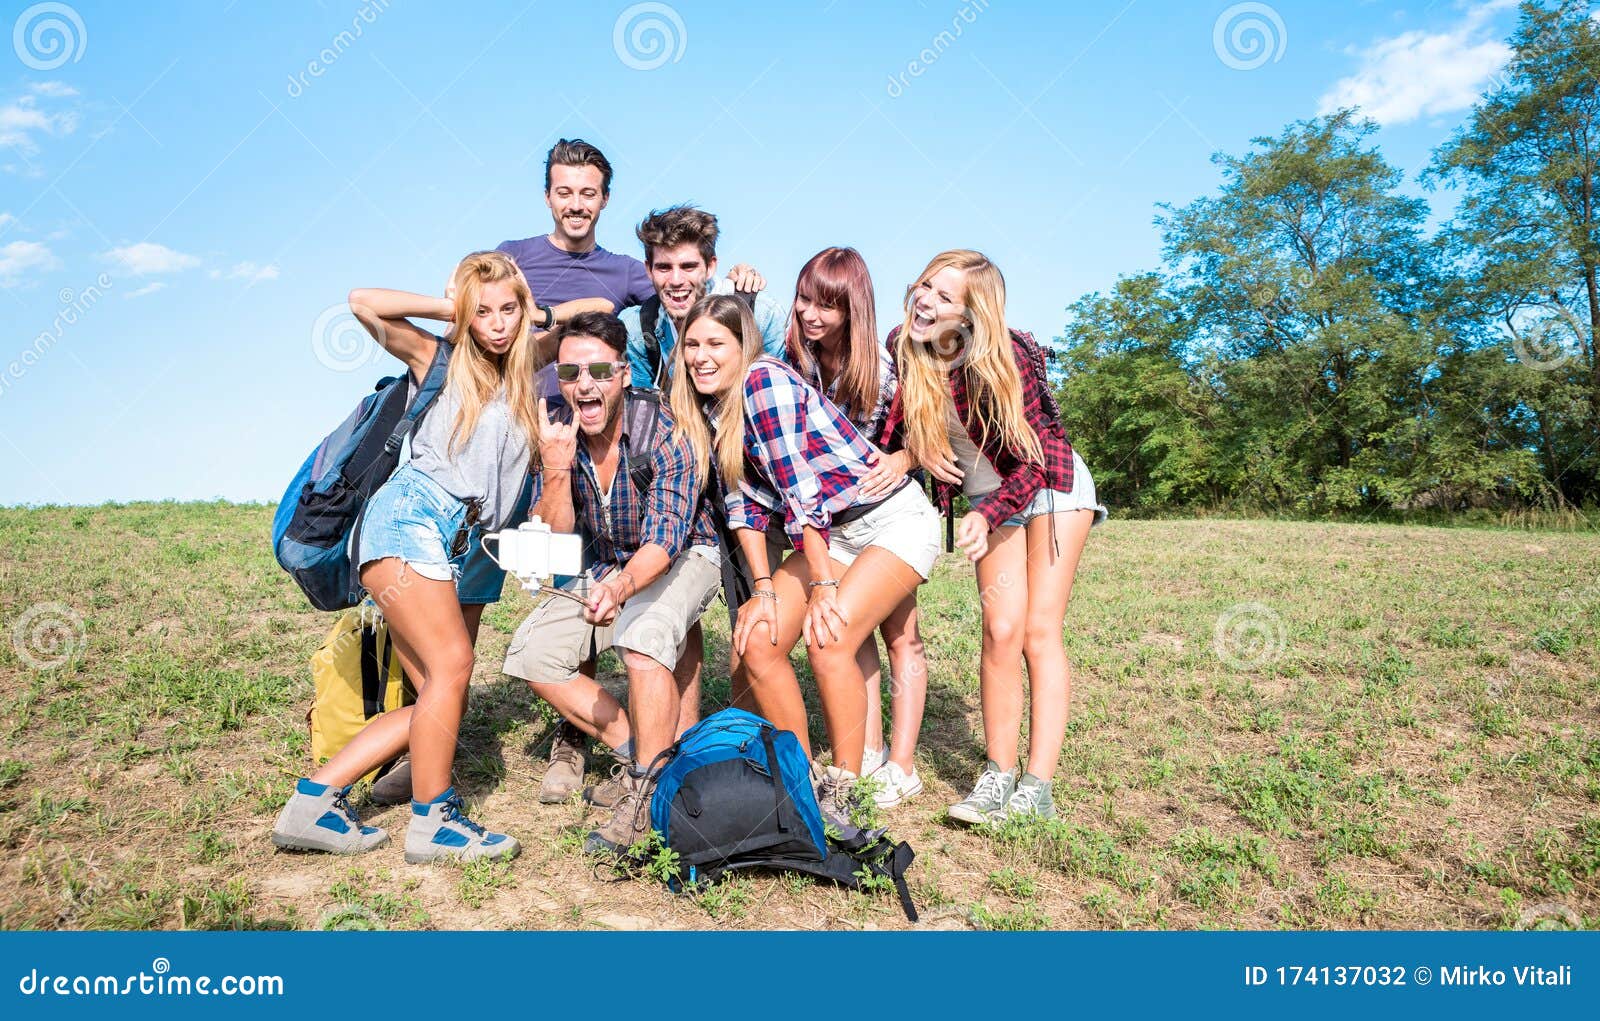 friends group taking selfie at trekking excursion - happy friendship and freedom concept with young millenial people having fun